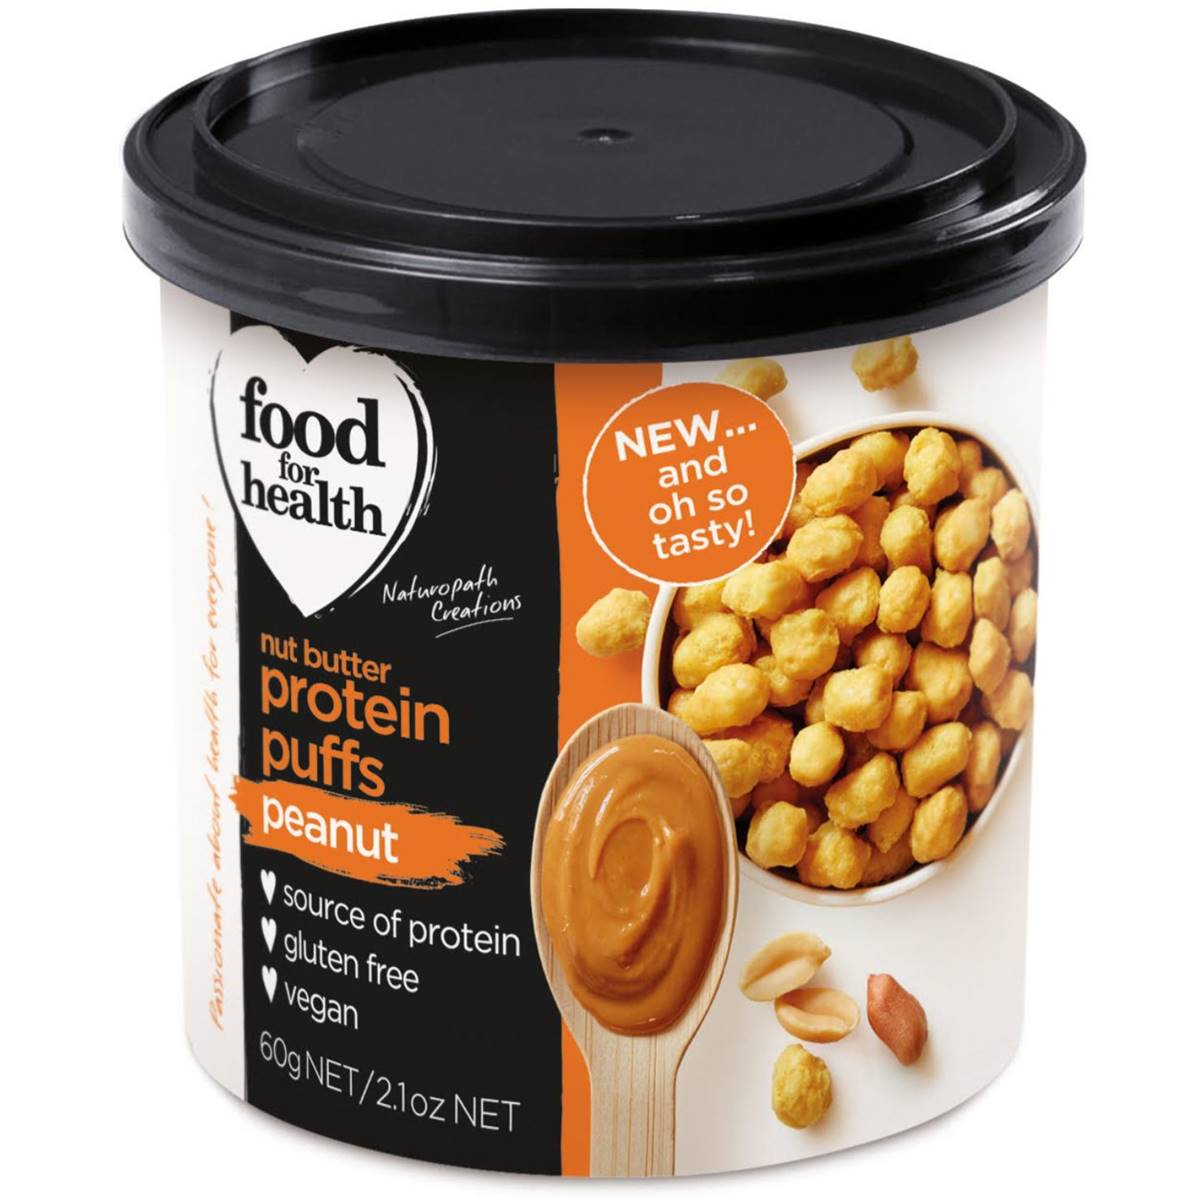 Calories in Food For Health Peanut Butter Protein Puffs